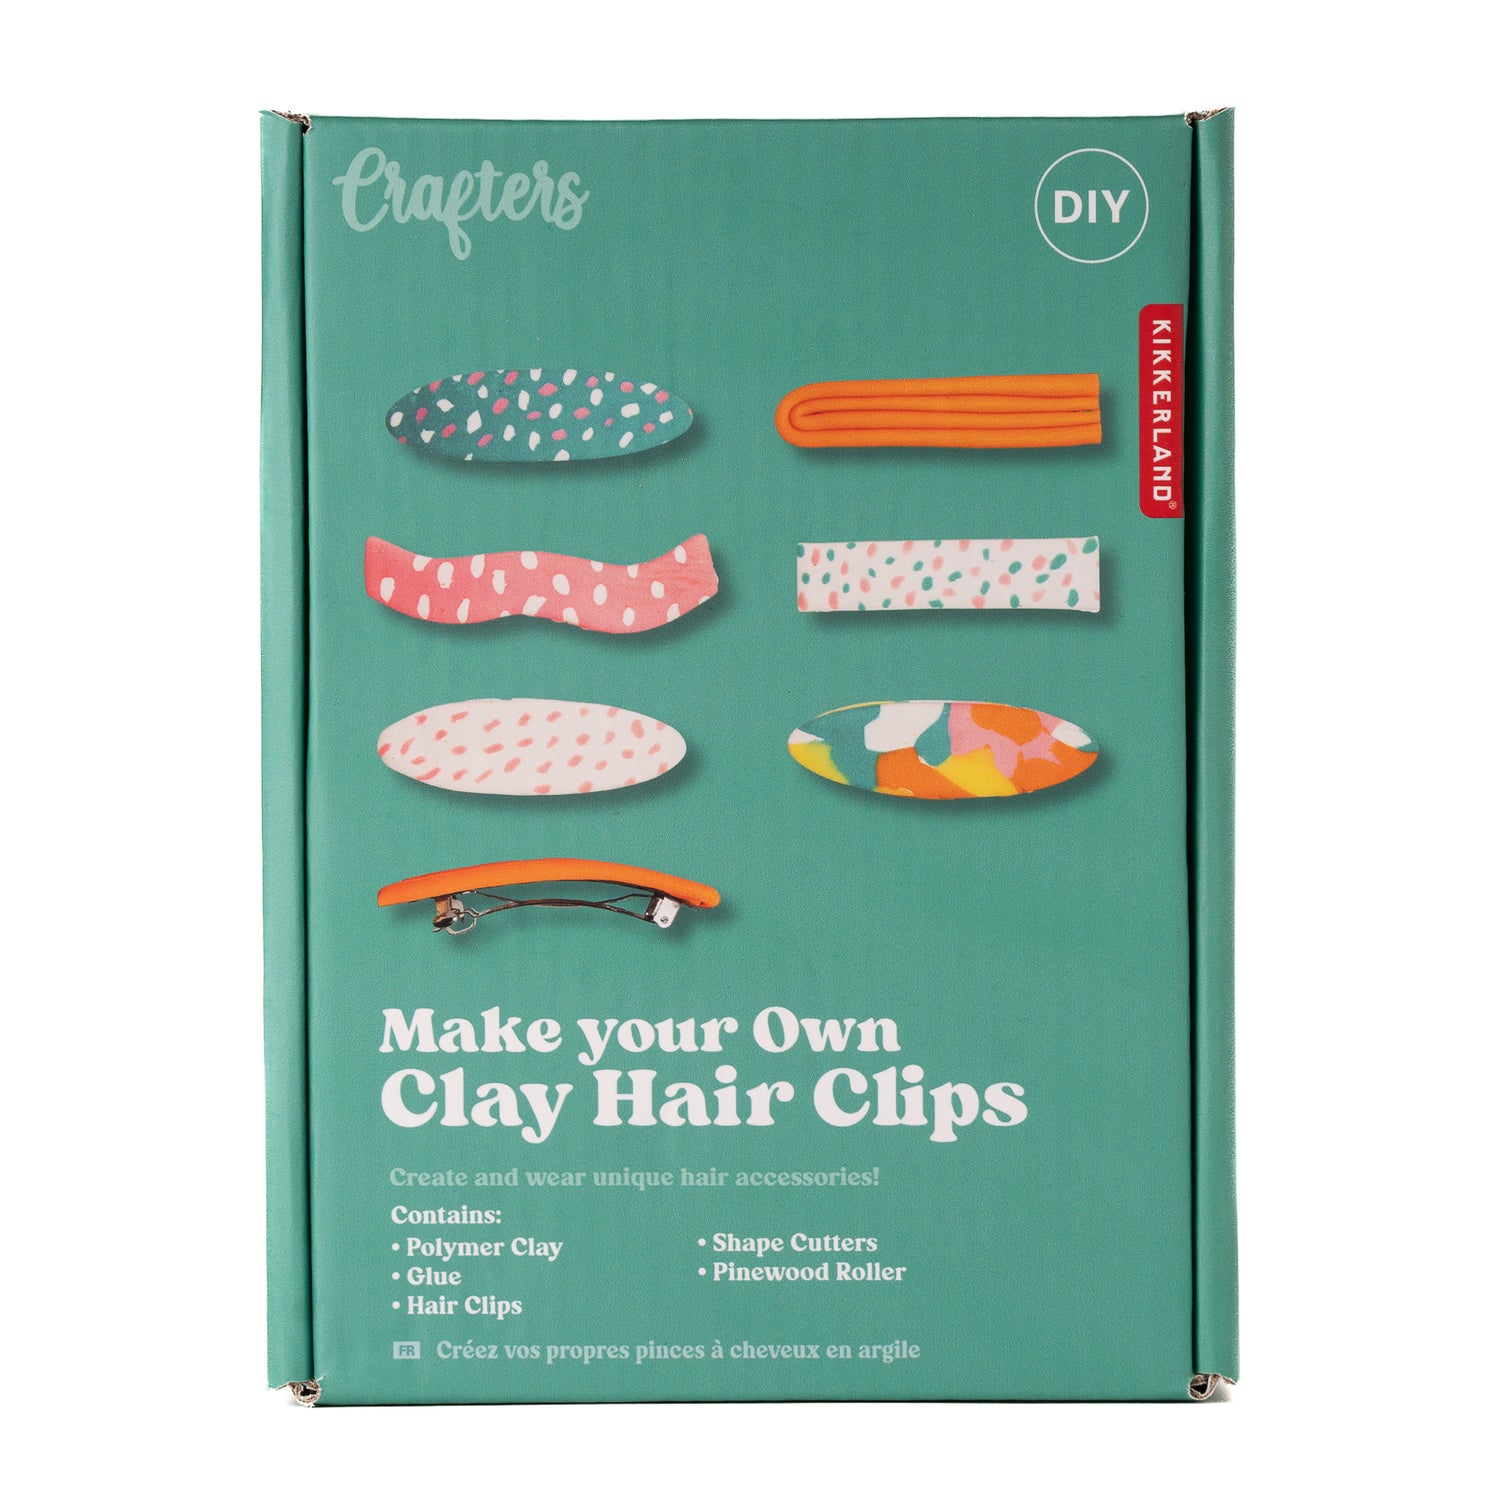 Crafter's Make Your Own Hair Clips